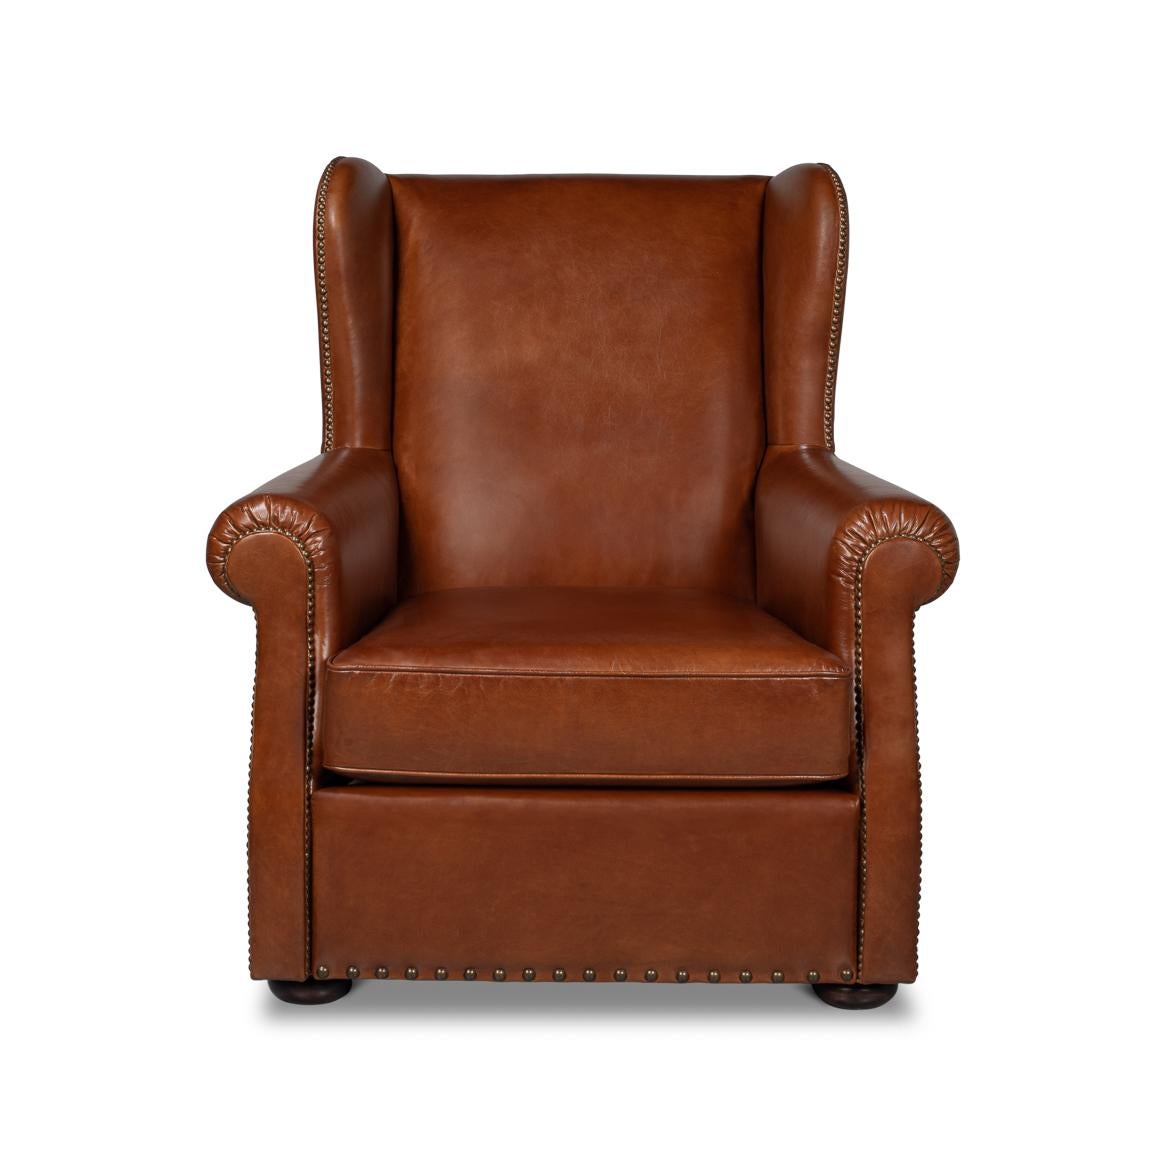 Featuring a high back design for ultimate support and rolled arms with intricate pleating detail, inviting you to a world of comfort with just one look. Wrapped in brown leather, its rich color is the epitome of luxury, bound to add a touch of class